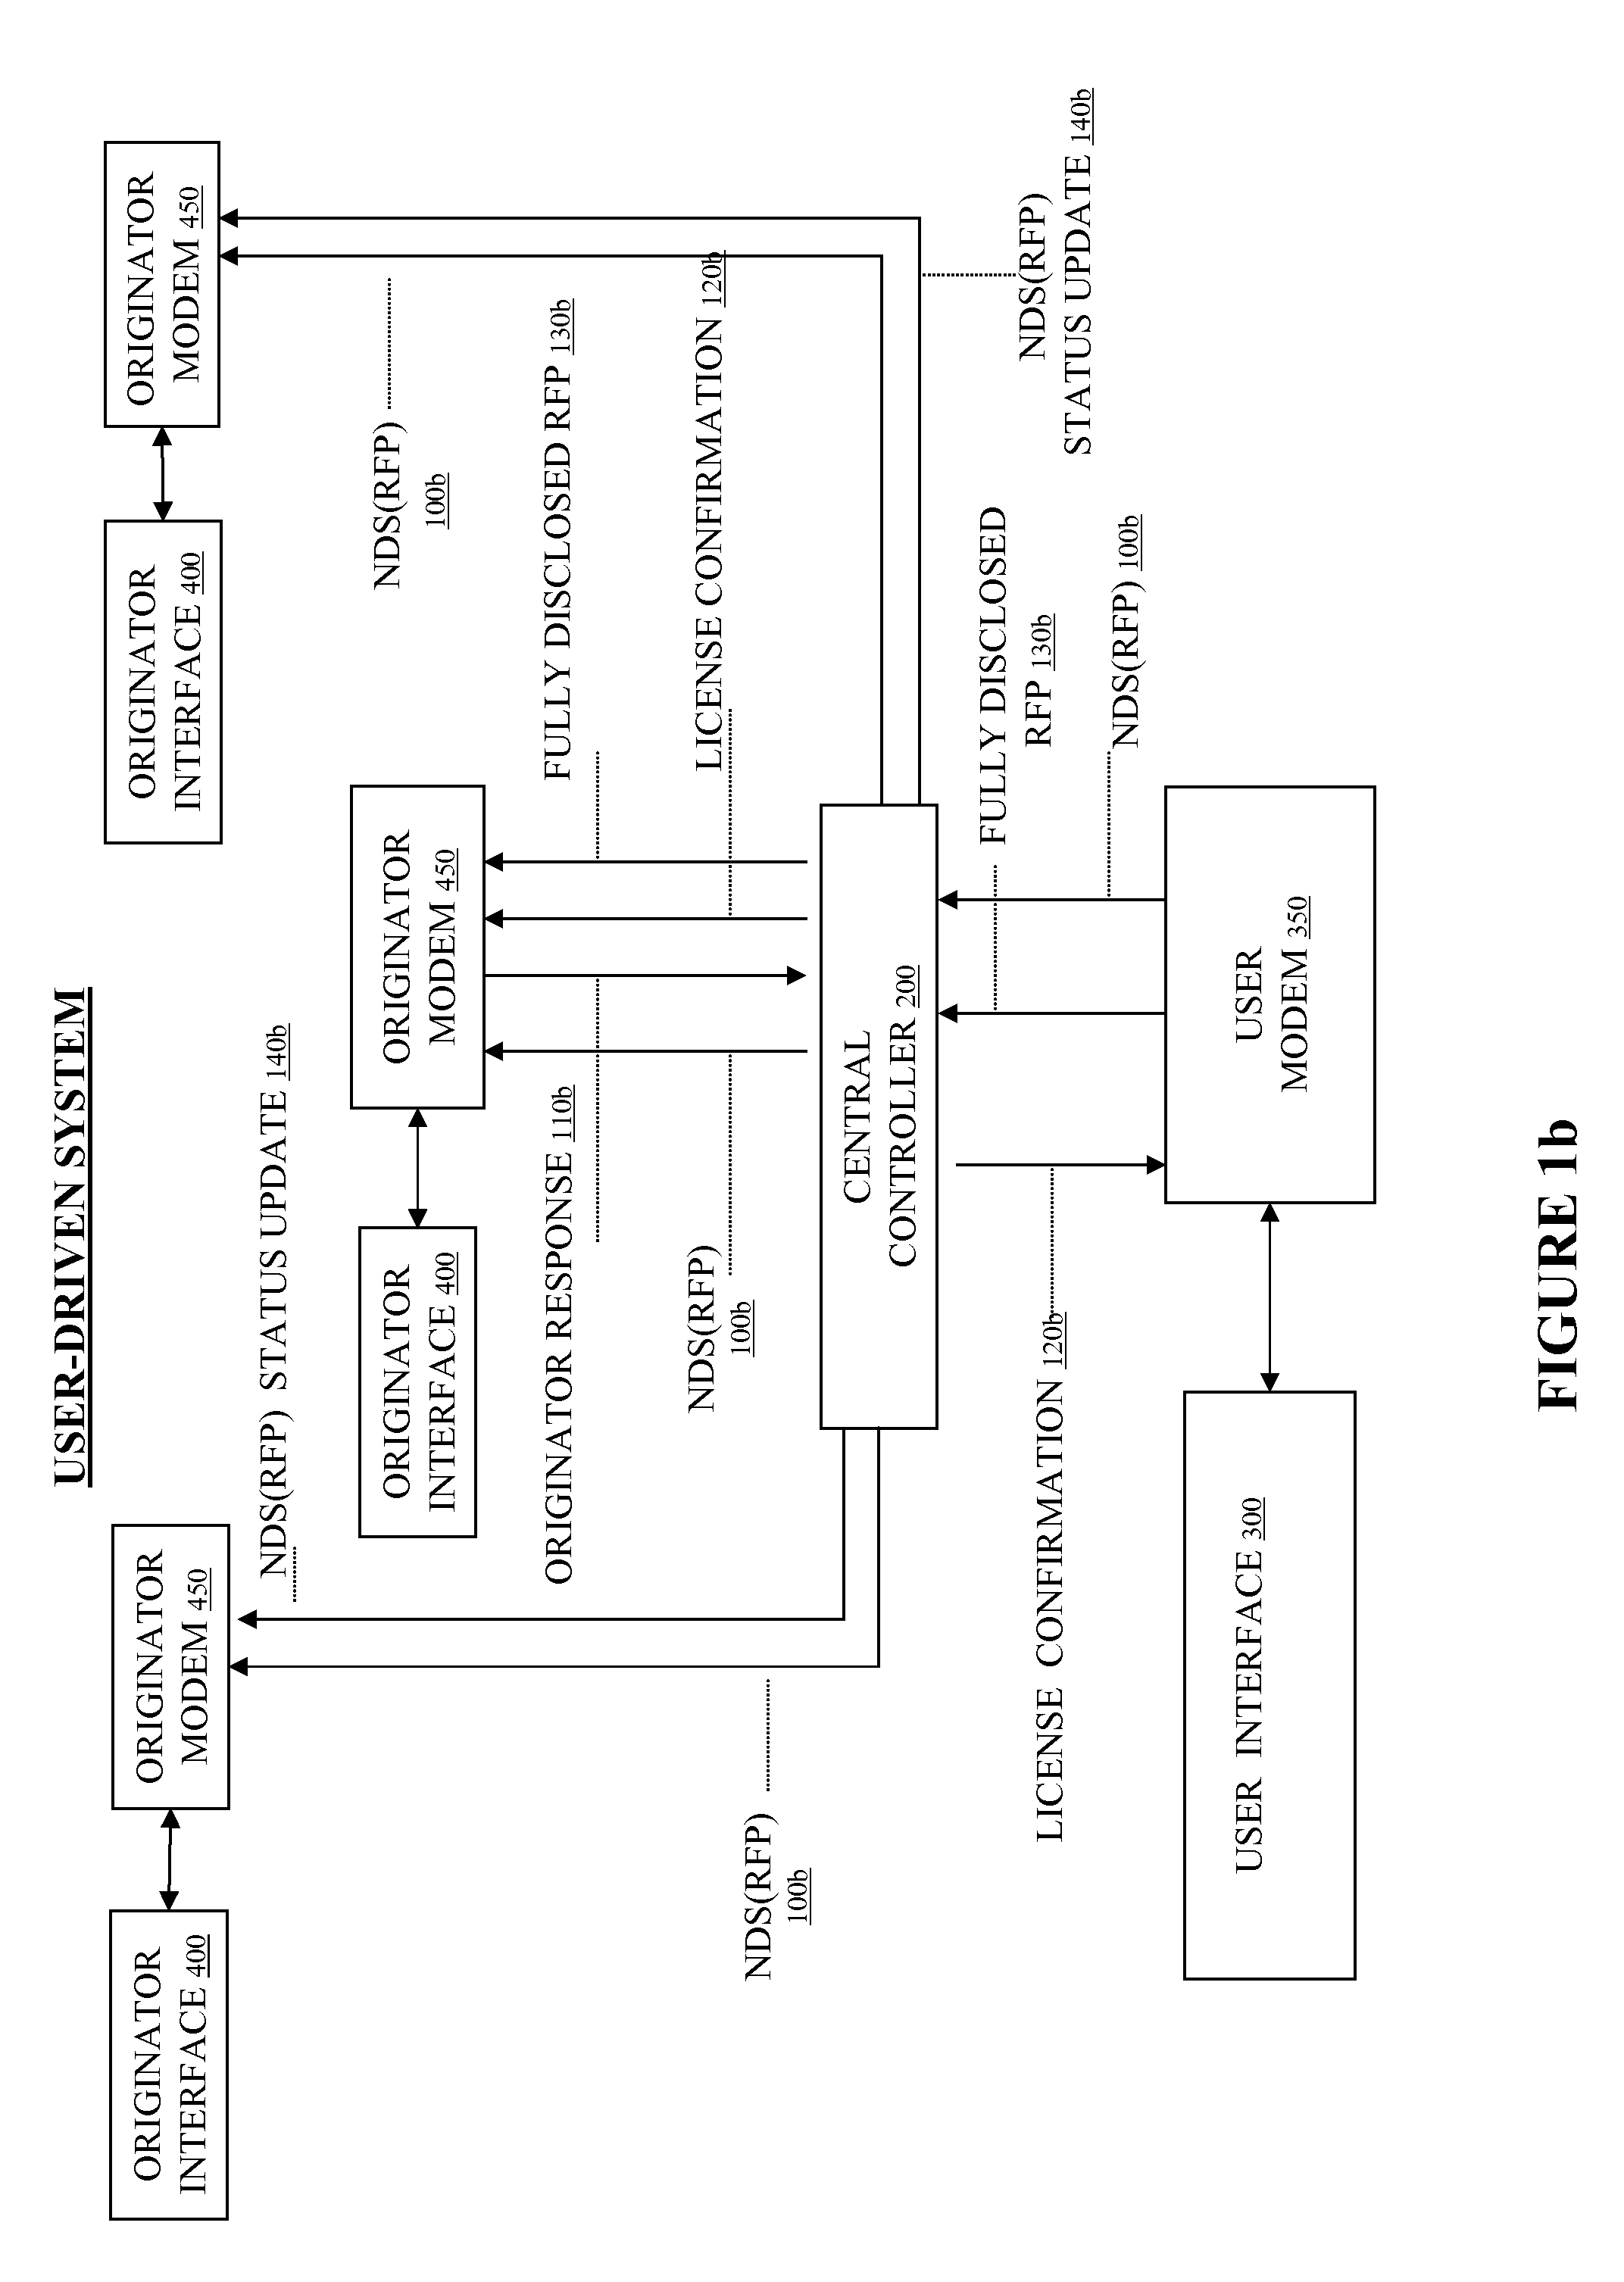 System and Method to Facilitate and Support Electronic Communication of Request for Proposals